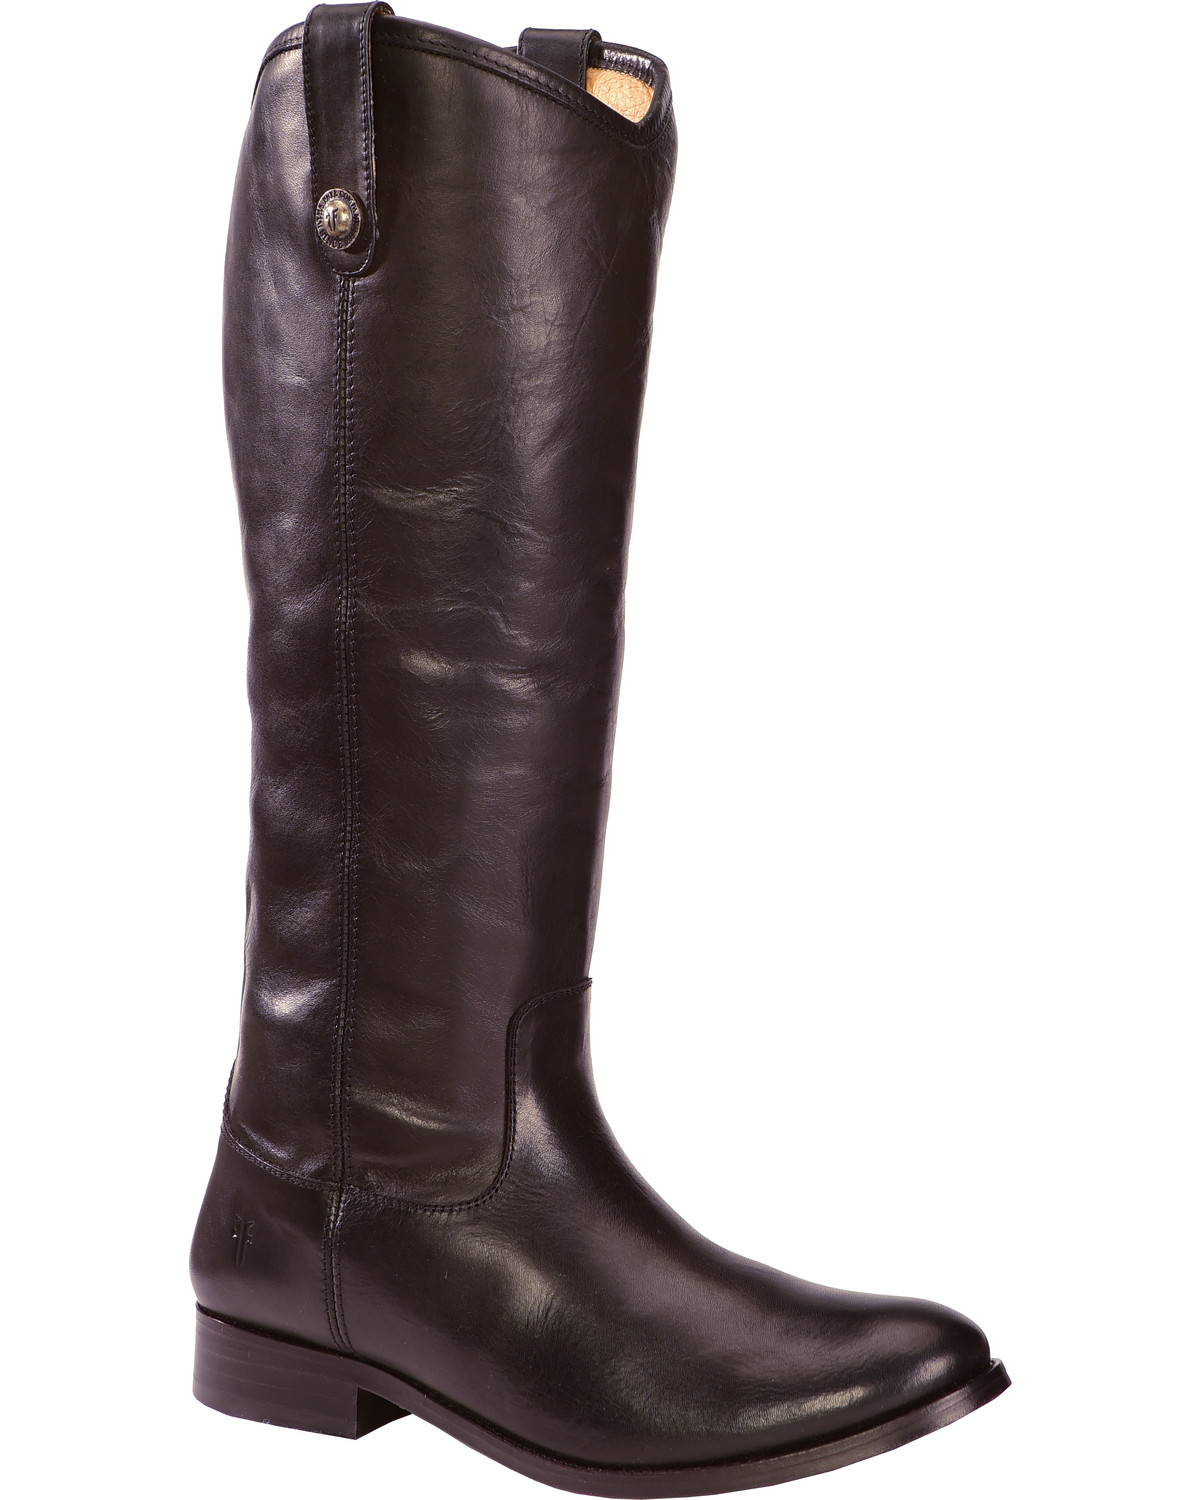 Frye Women's Melissa Button Riding Boots - Round Toe